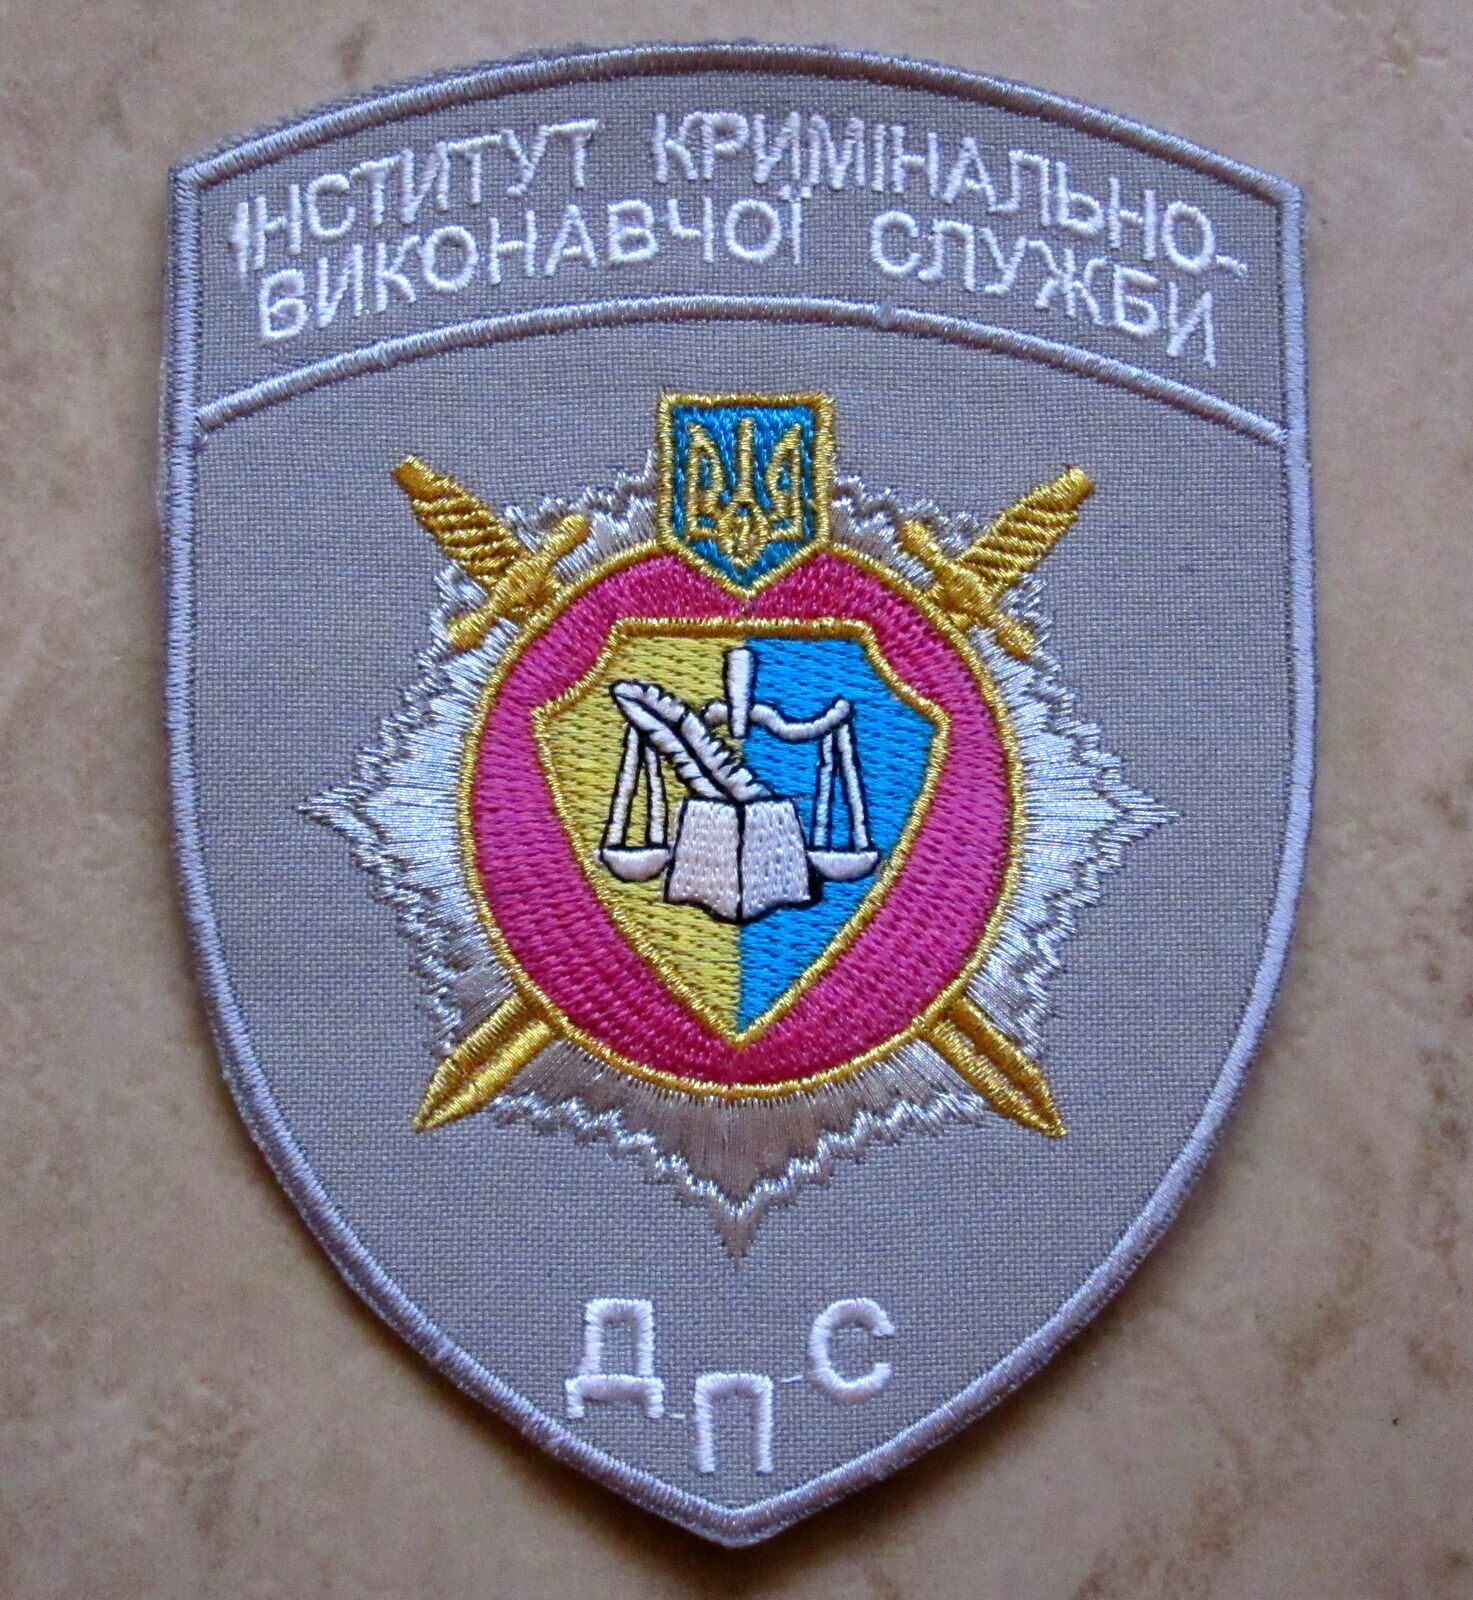 UKRAINE POLICE FORENSIC & EXECUTIVE SERVICE UNIFORM CLOTH PATCH, embroidered